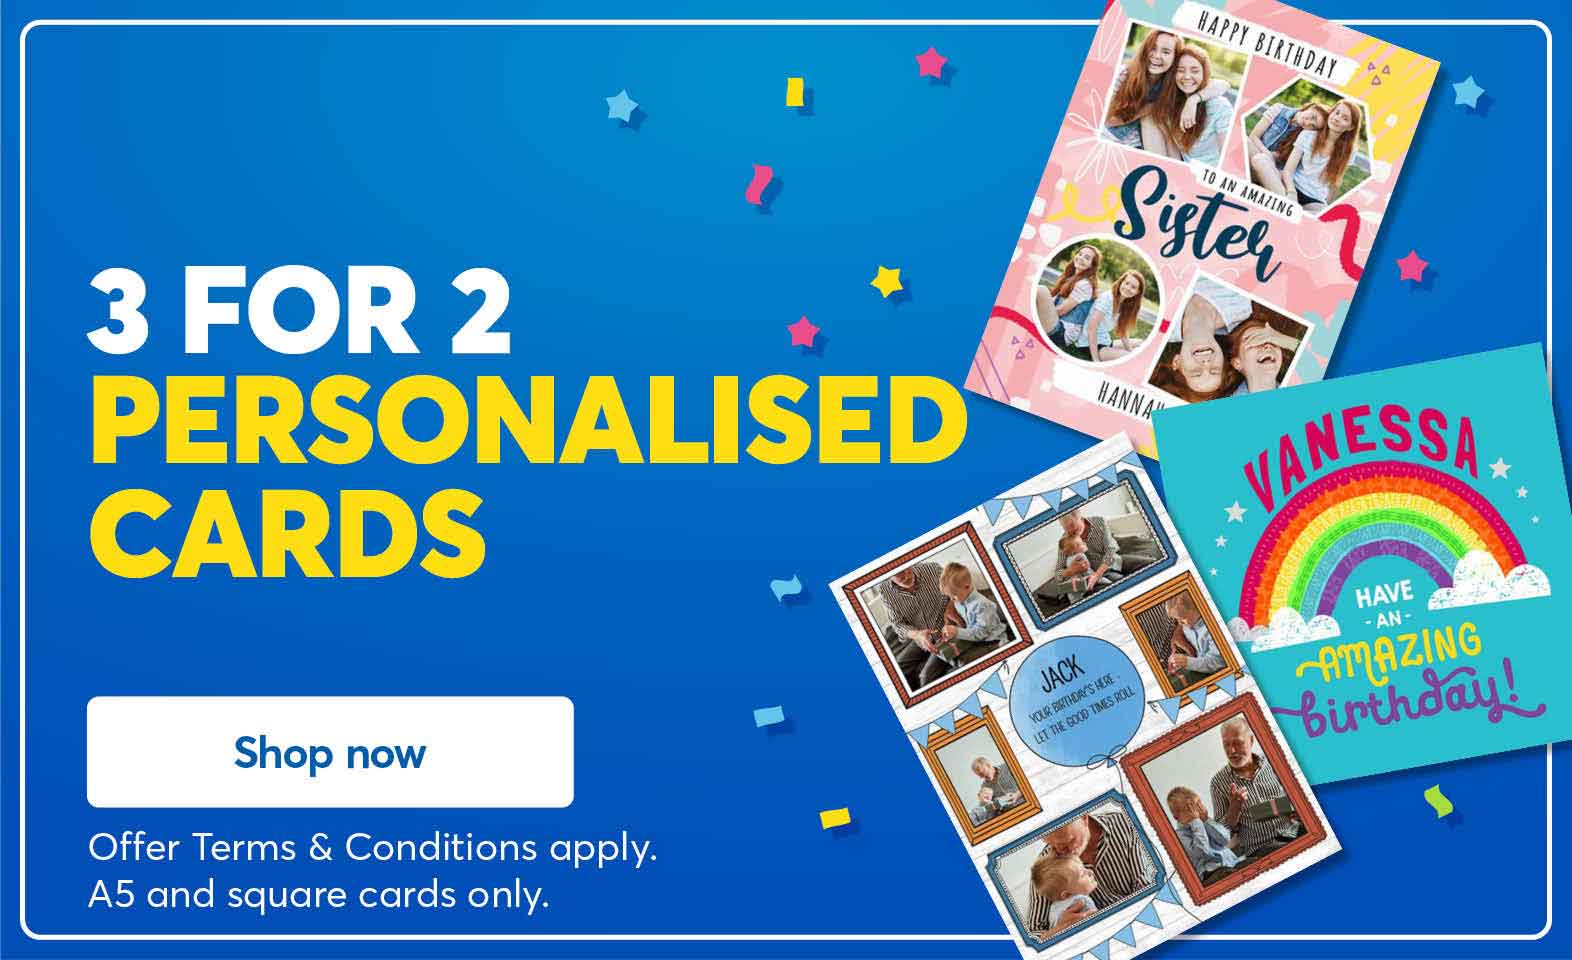 3 for 2 on personalised cards